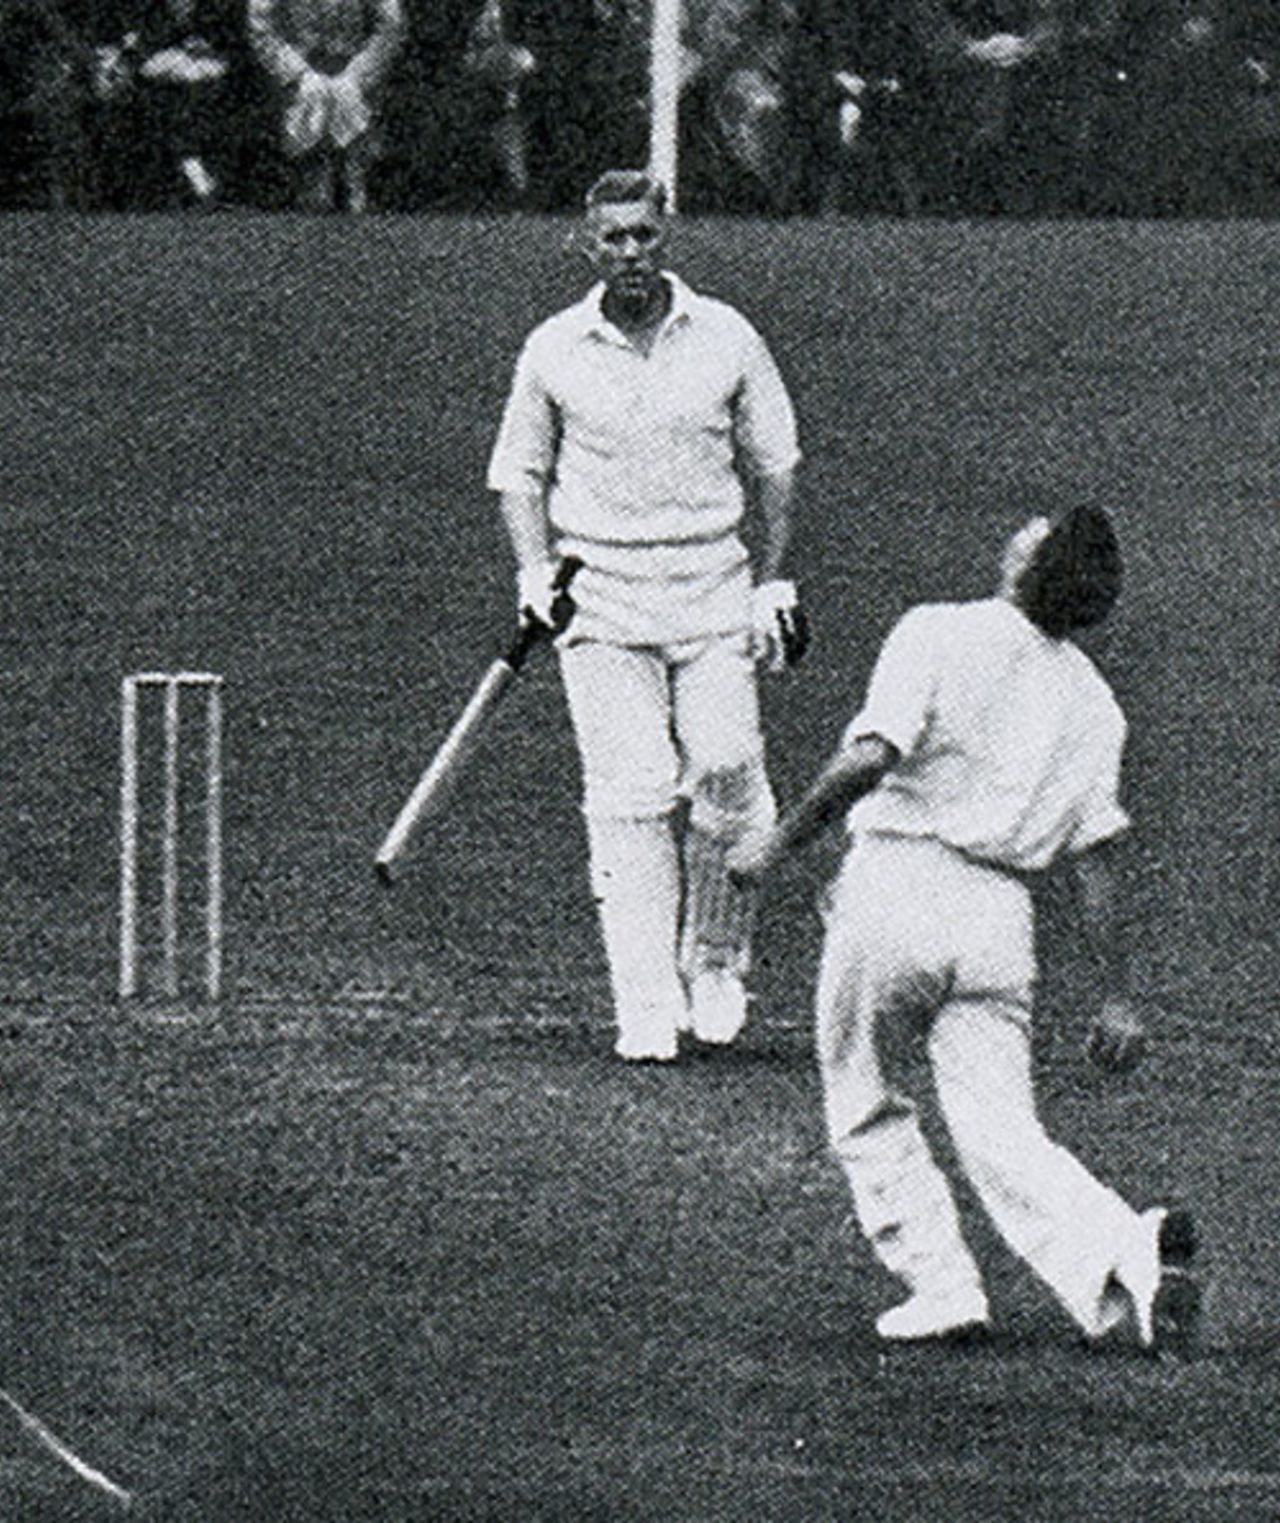 Jack Cowie catches Jim Smith to complete his 6 for 67, England v New Zealand,  2nd Test, Manchester, July 27, 1937